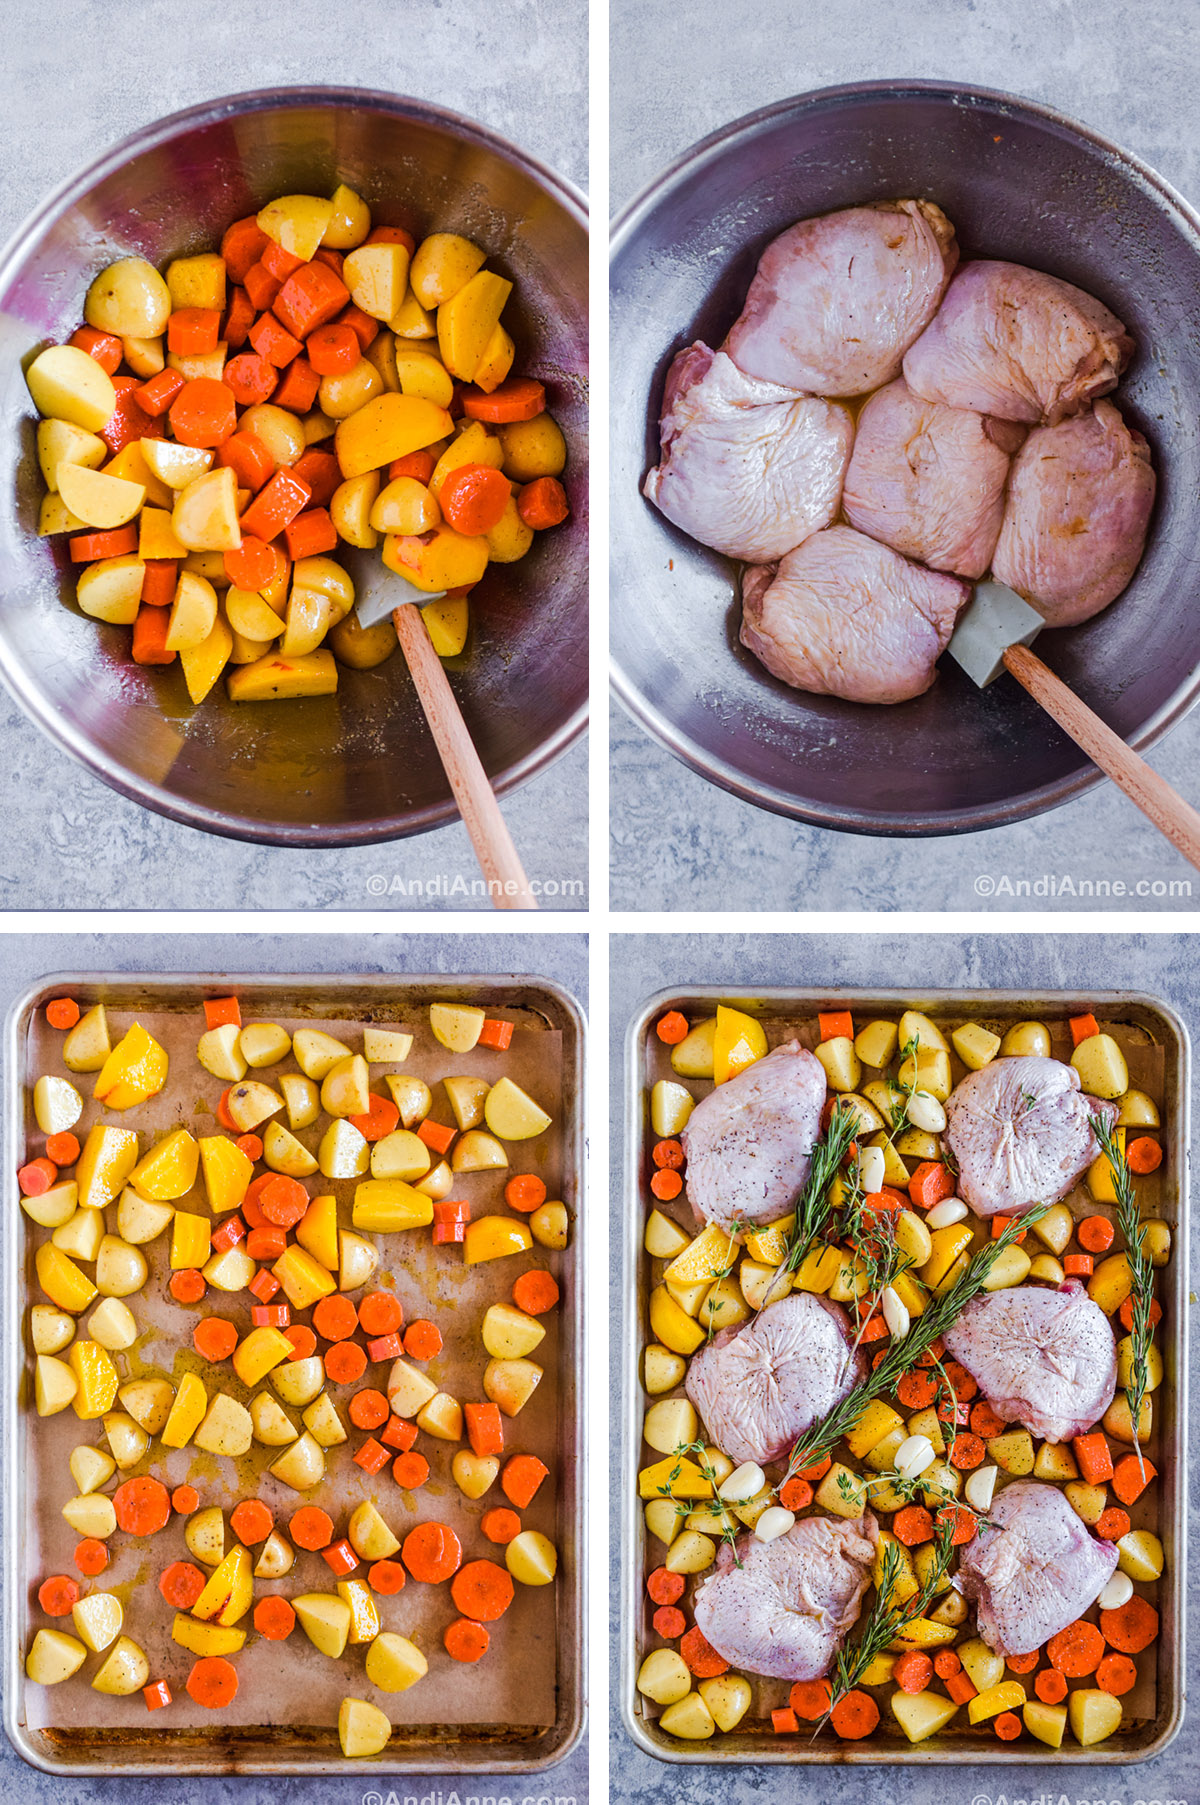 Four images grouped together including a bowl with chopped potatoes carrots and beets. Another image of a bowl with raw chicken thighs tossed in oil, salt and pepper. The chopped vegetables on a sheet pan in a single layer. And the last image has vegetables, raw chicken and fresh herbs on the baking sheet.